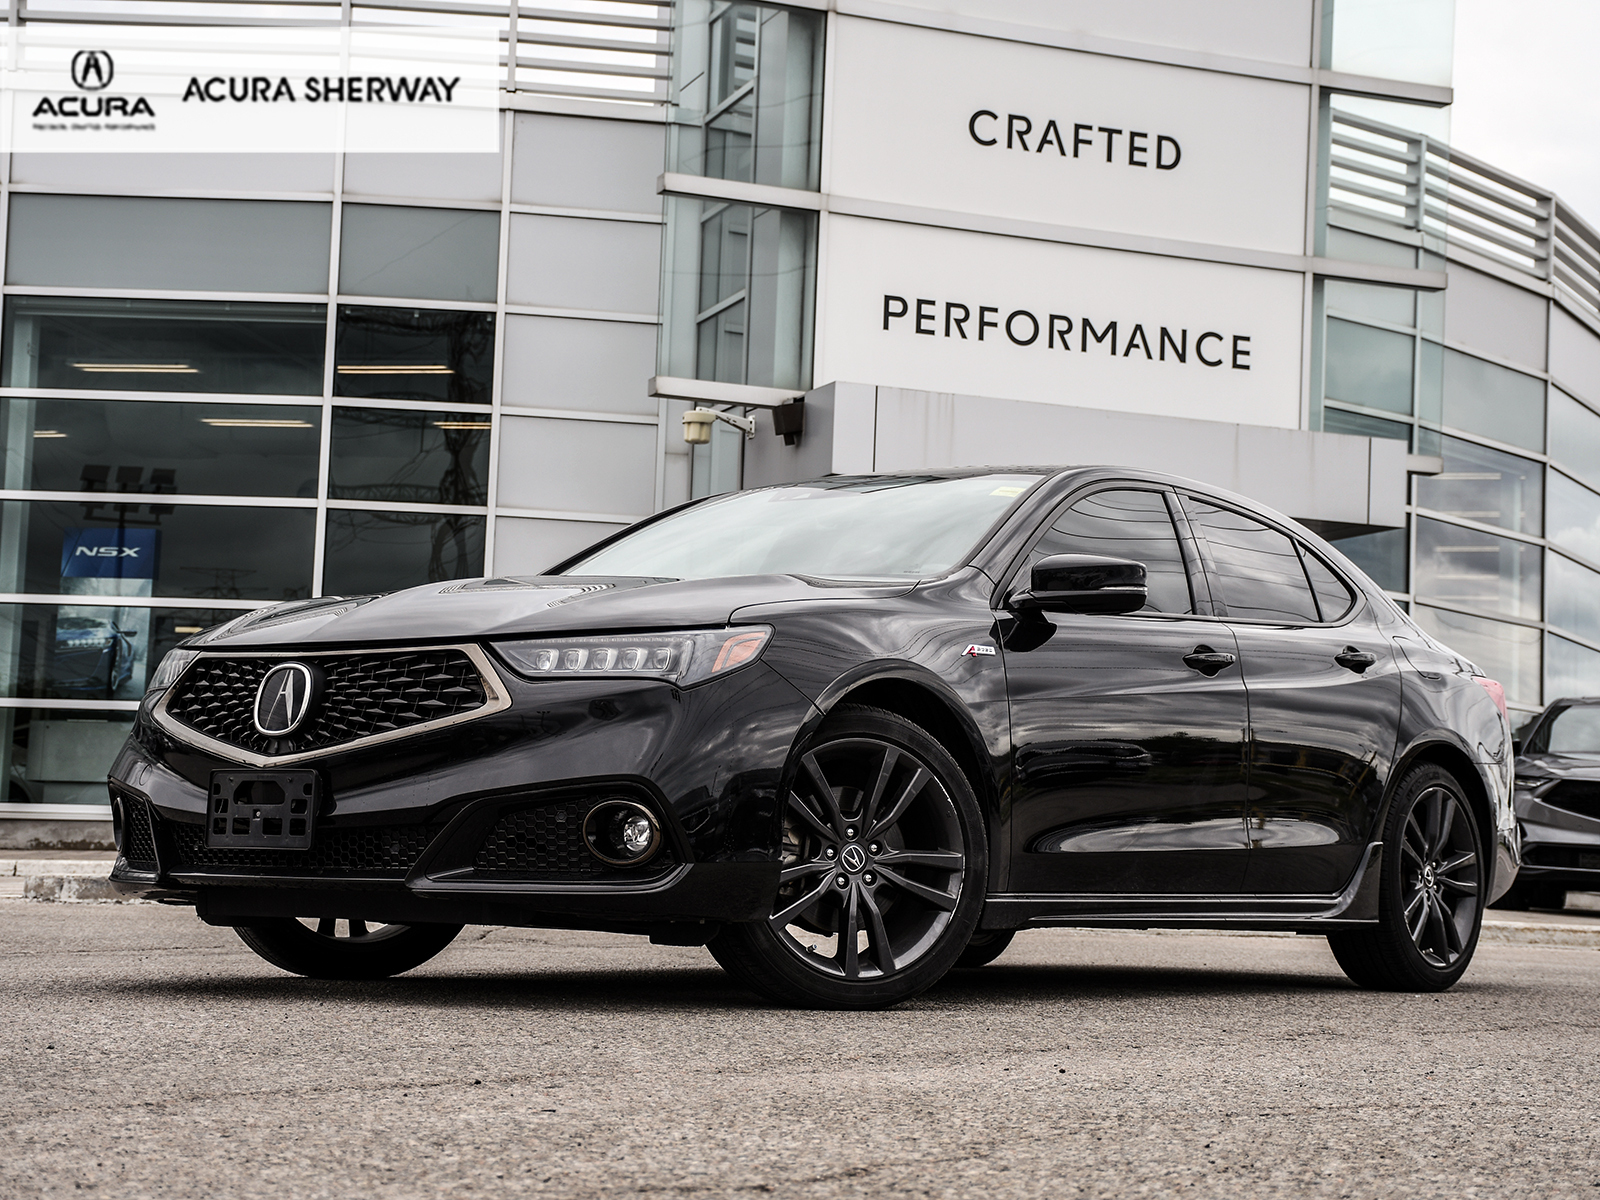 2020 Acura TLX Tech A-SPEC - ACURA CERTIFIED